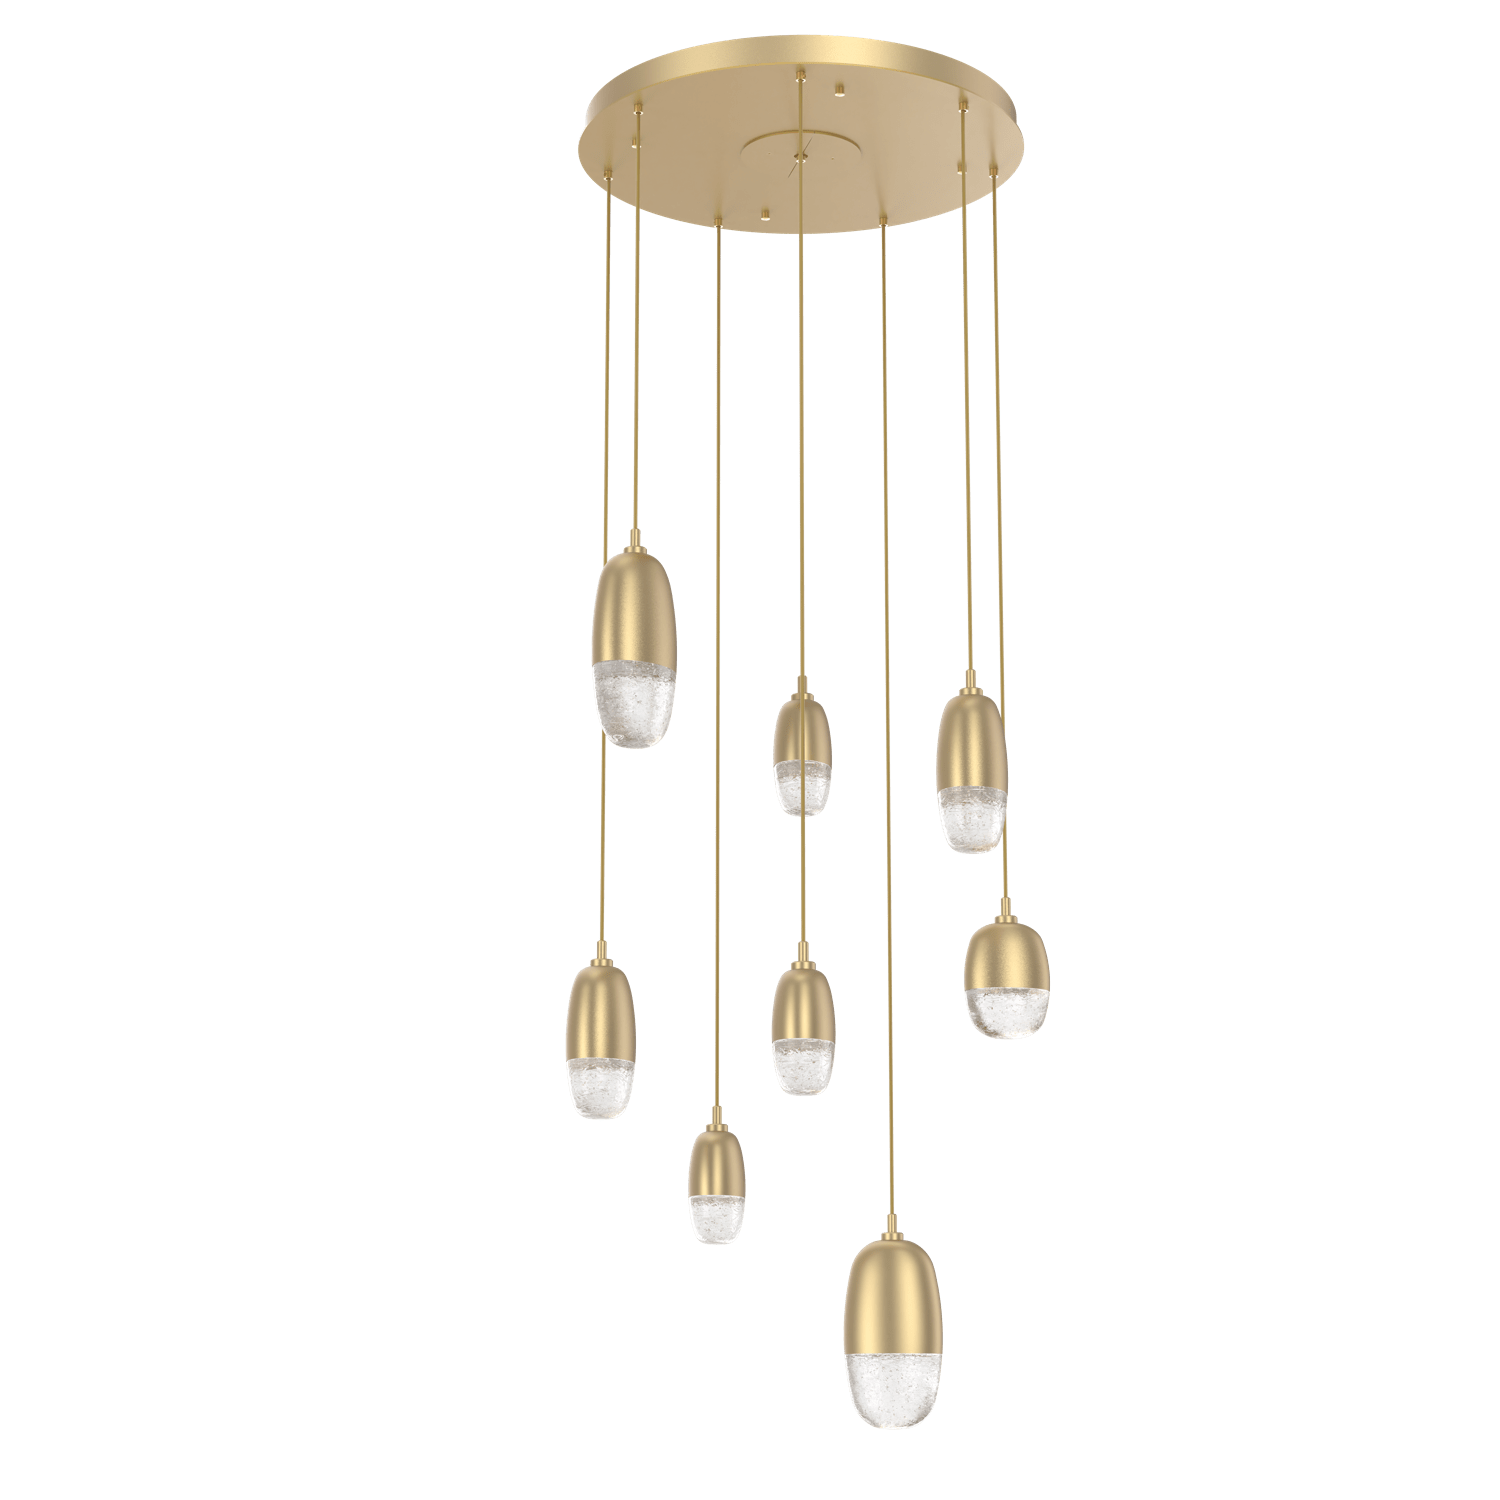 CHB0079-08-GB-Hammerton-Studio-Pebble-8-light-round-pendant-chandelier-with-gilded-brass-finish-and-clear-cast-glass-shades-and-LED-lamping